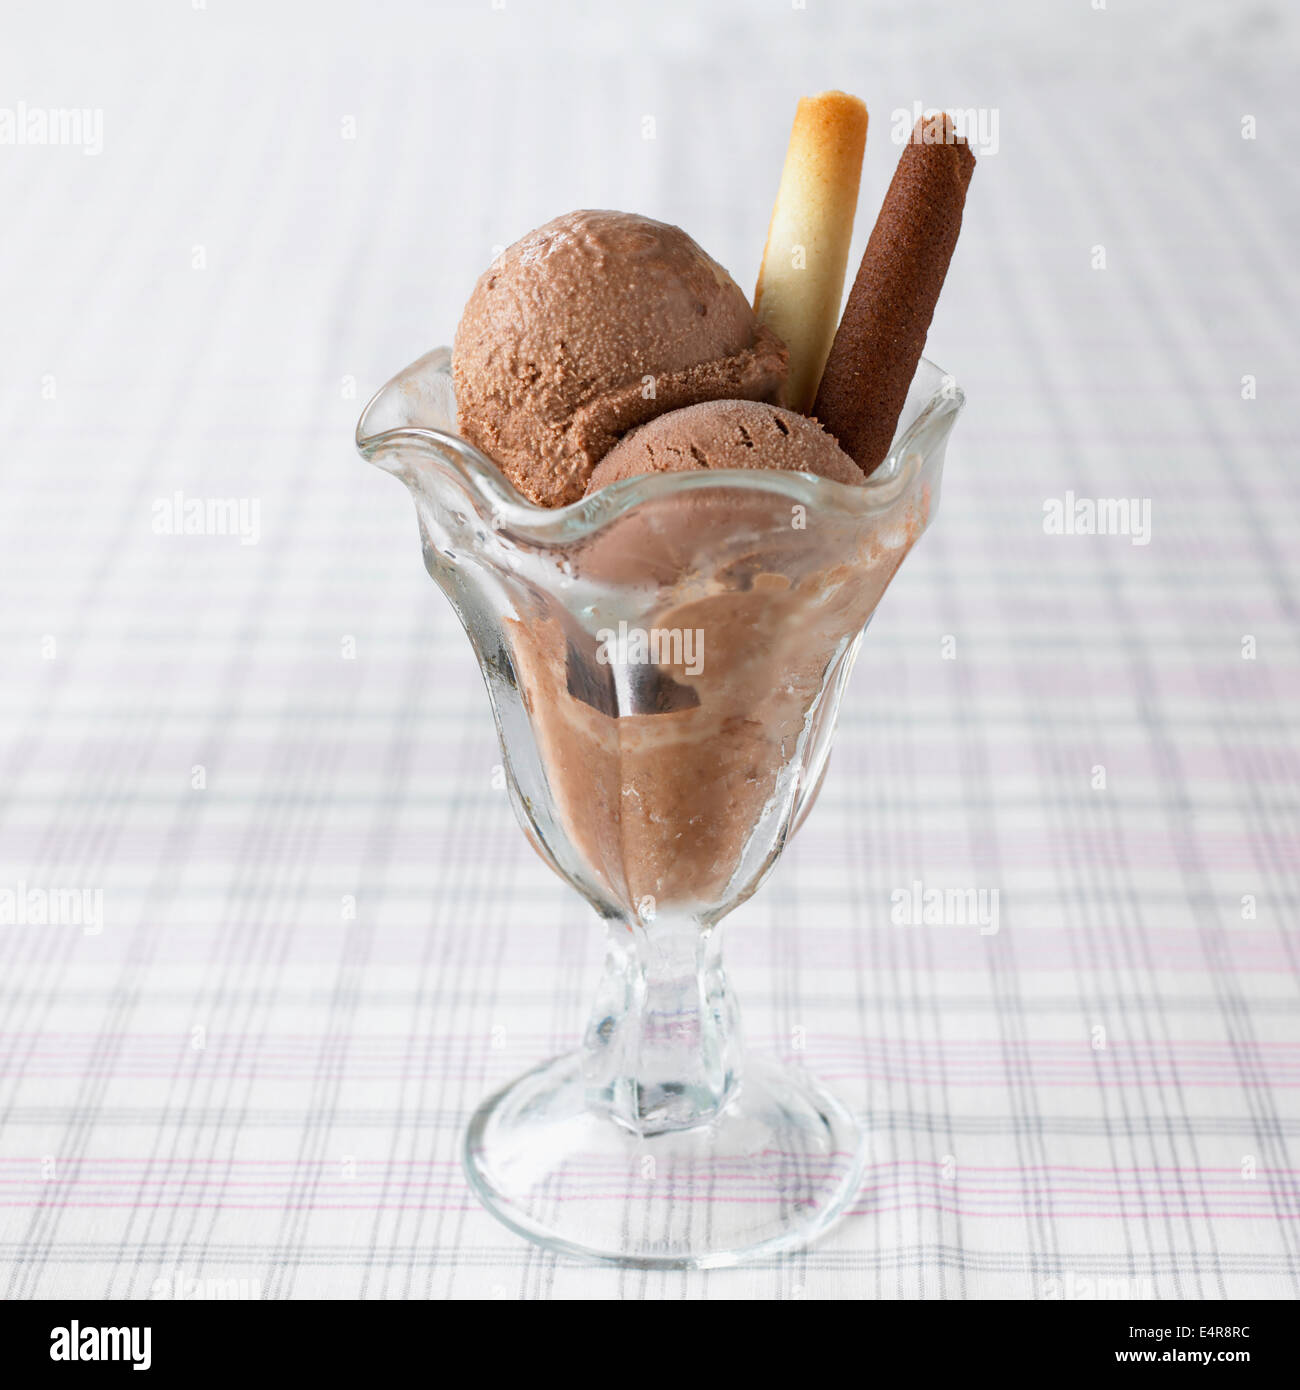 Chocolate ice cream with biscuit tubes Stock Photo